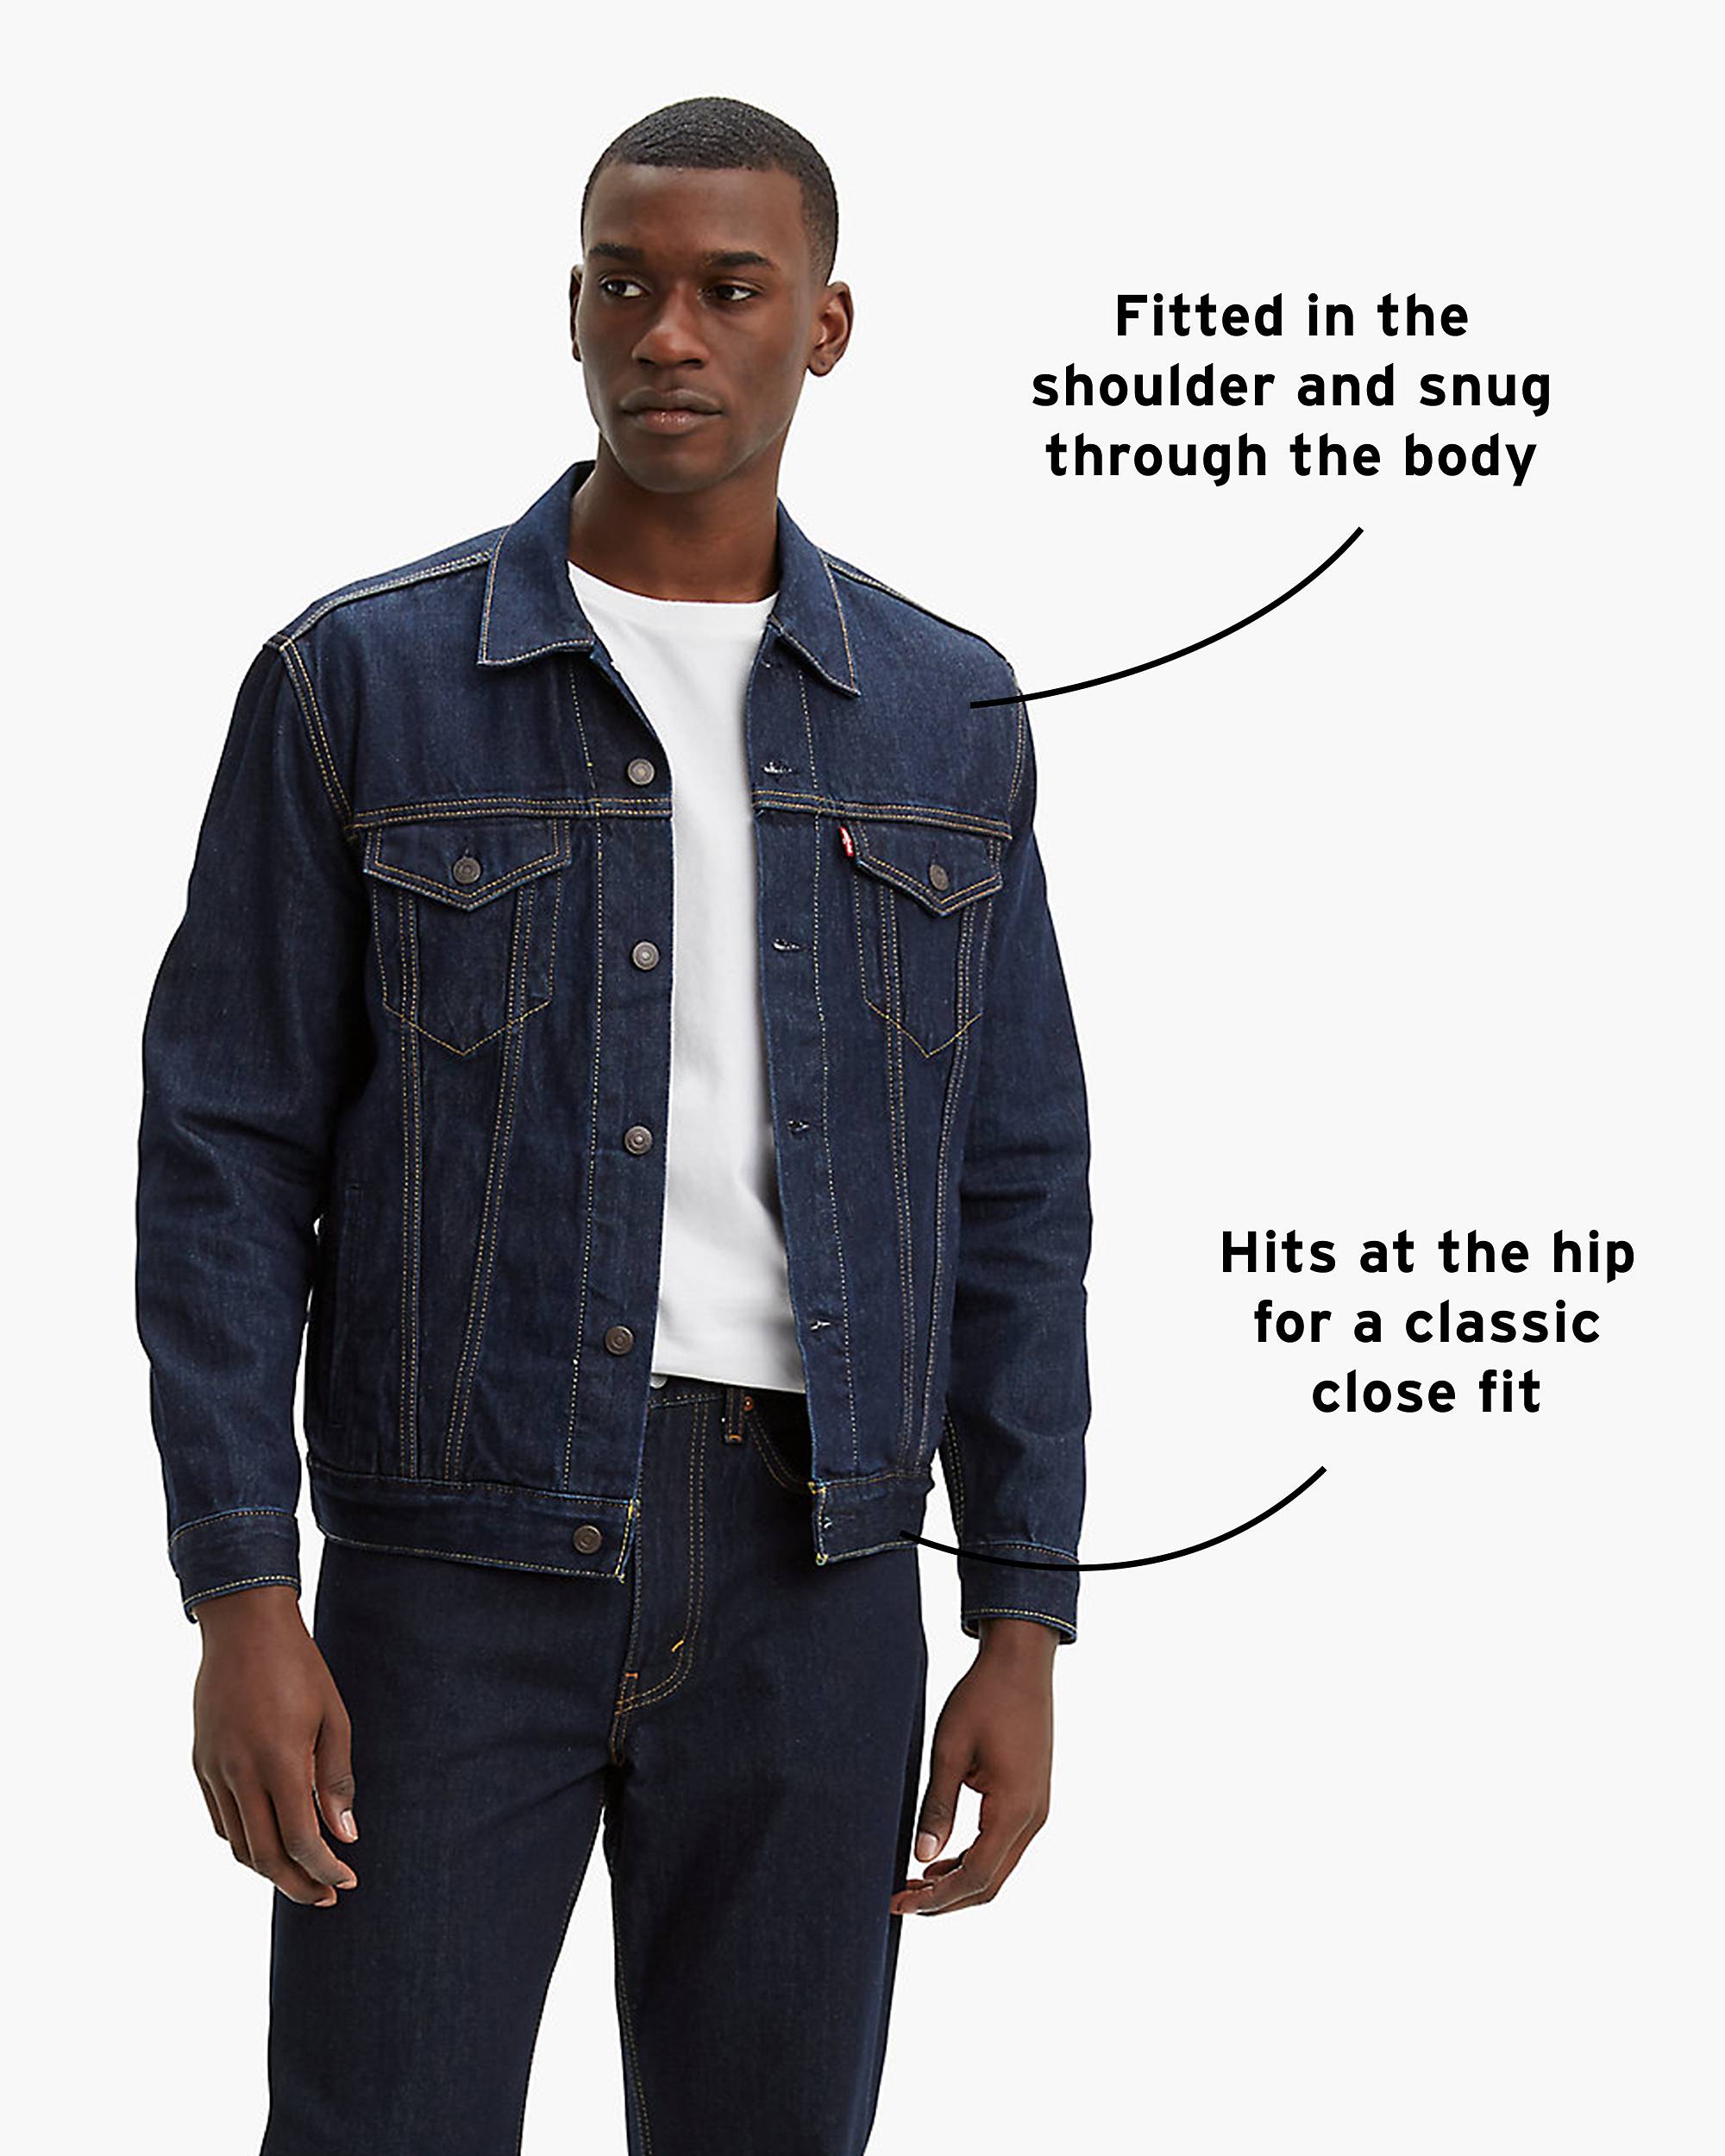 Model wearing trucker jacket with copy: "fitted in the shoulder and snug through the body, hits at the hip for a classic close fit"